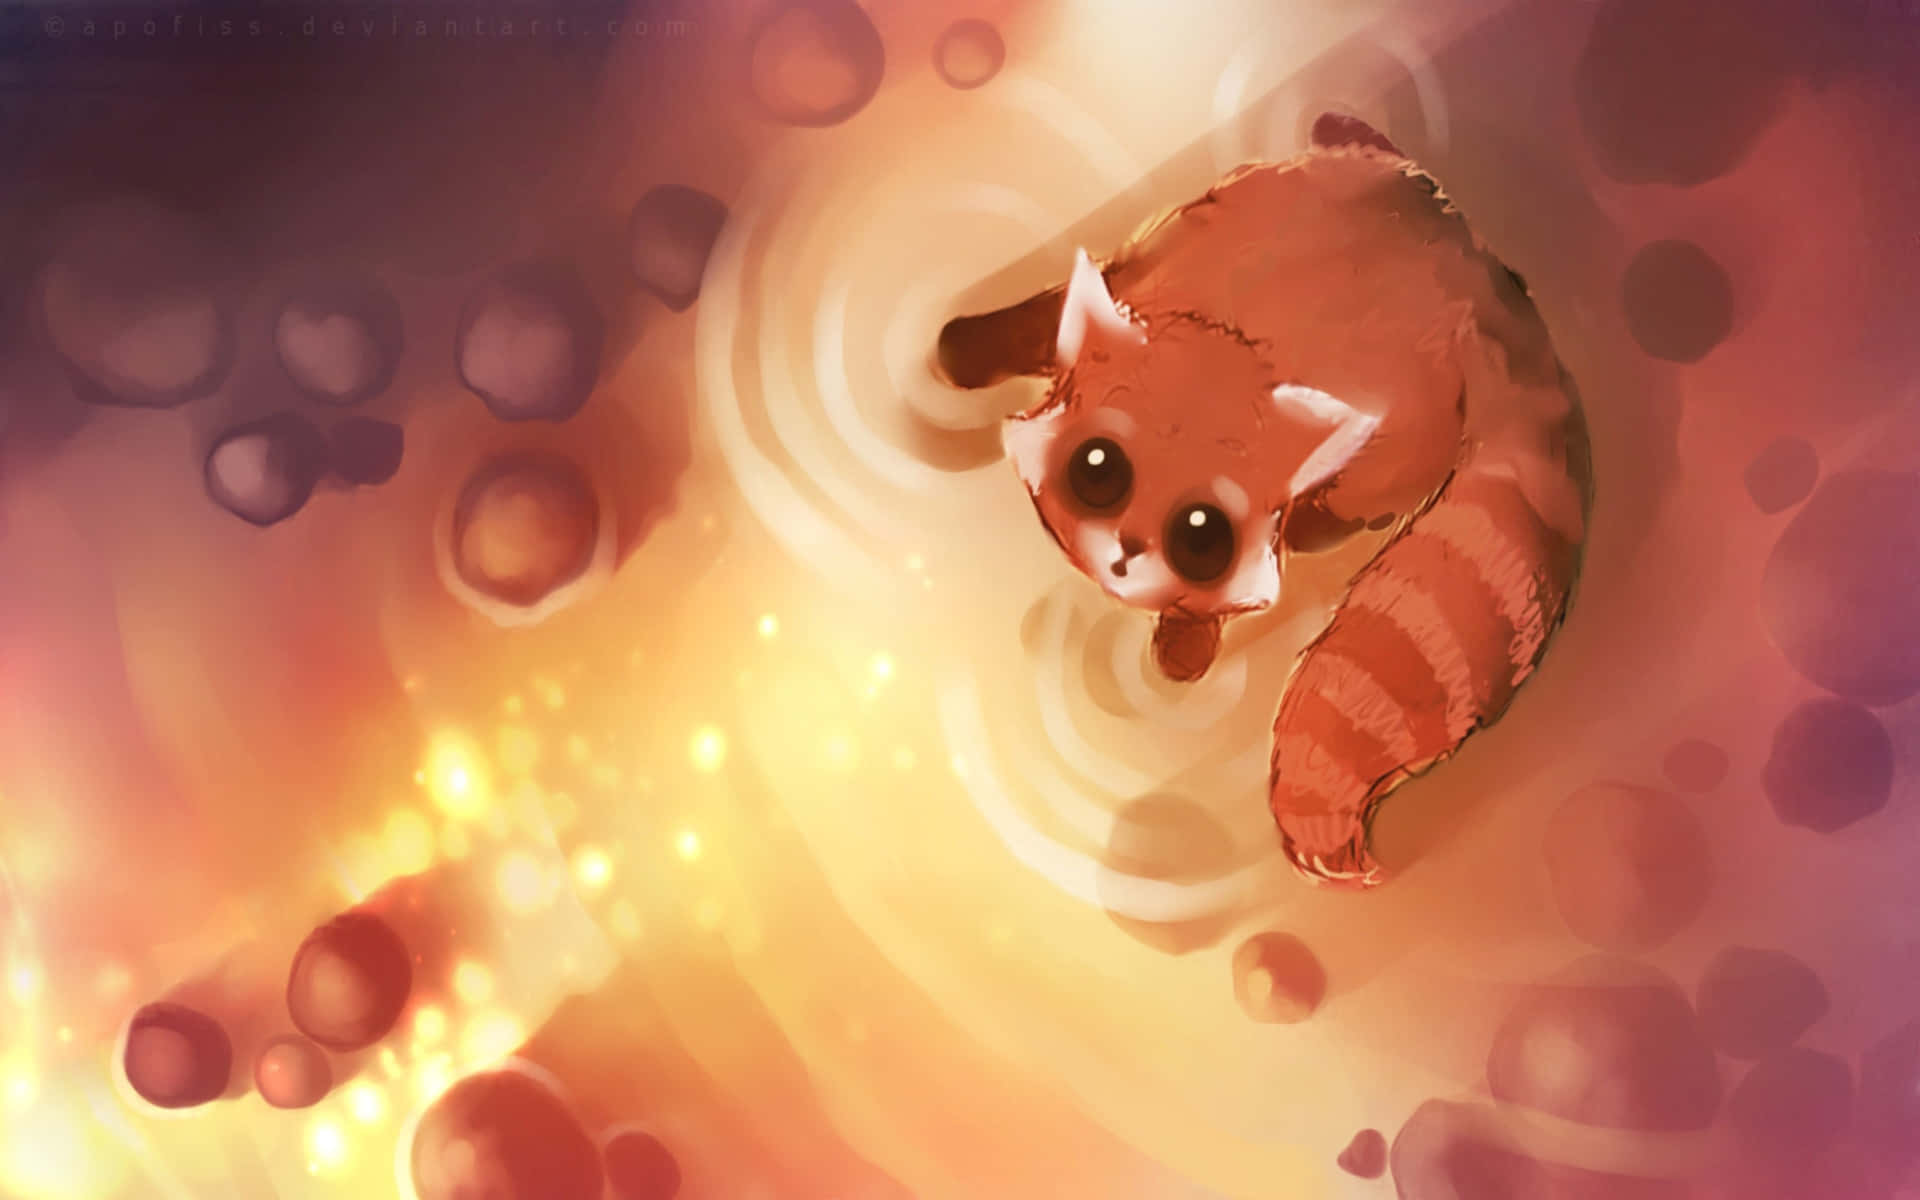 Adorable Red Panda with Big Round Eyes Wallpaper